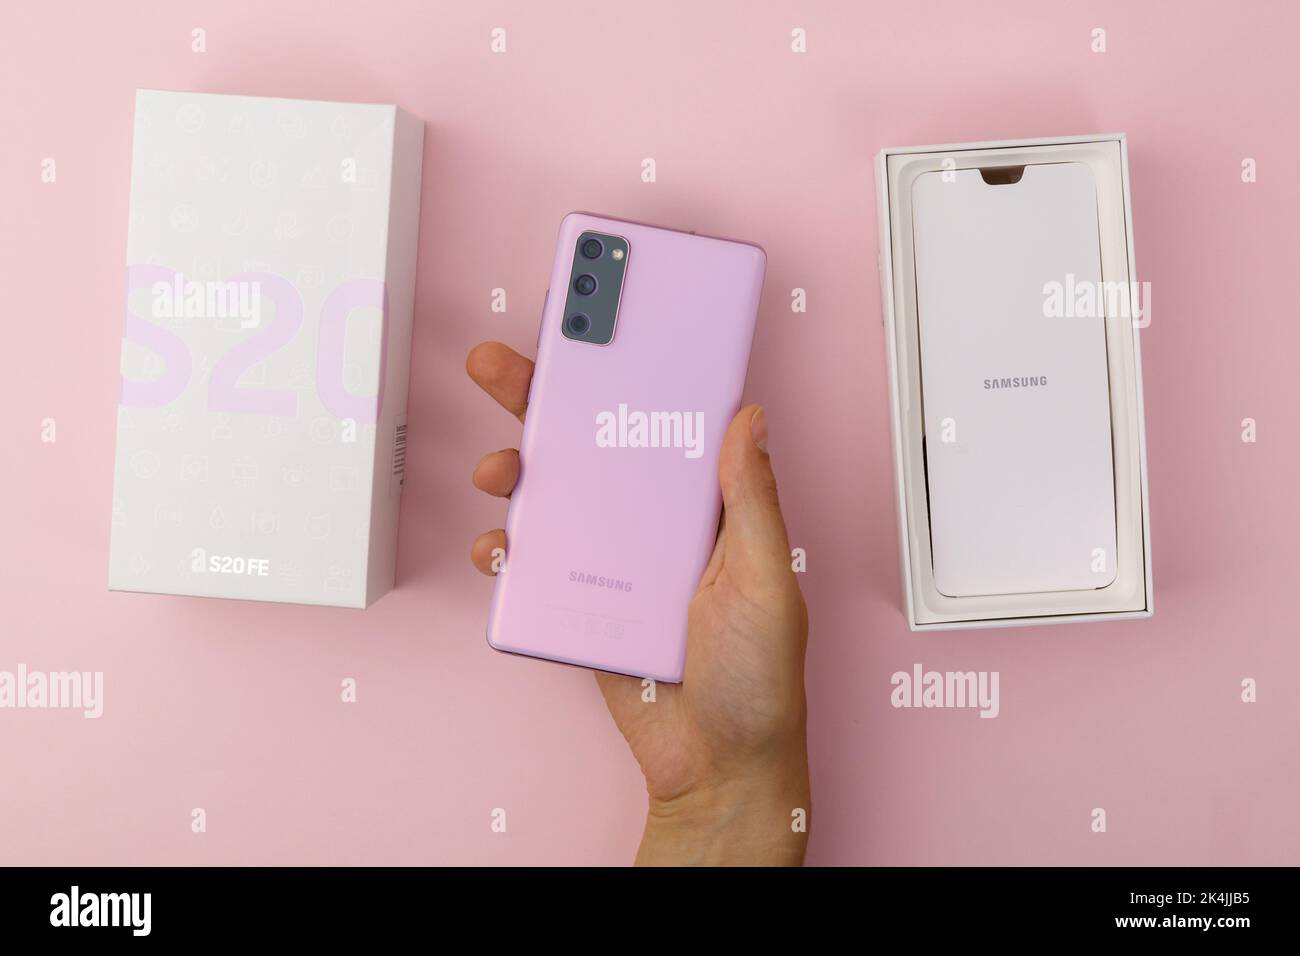 Tyumen, Russia-July 18, 2022: New Samsung s20 fe smartphone in a box. Top view, pink background Stock Photo